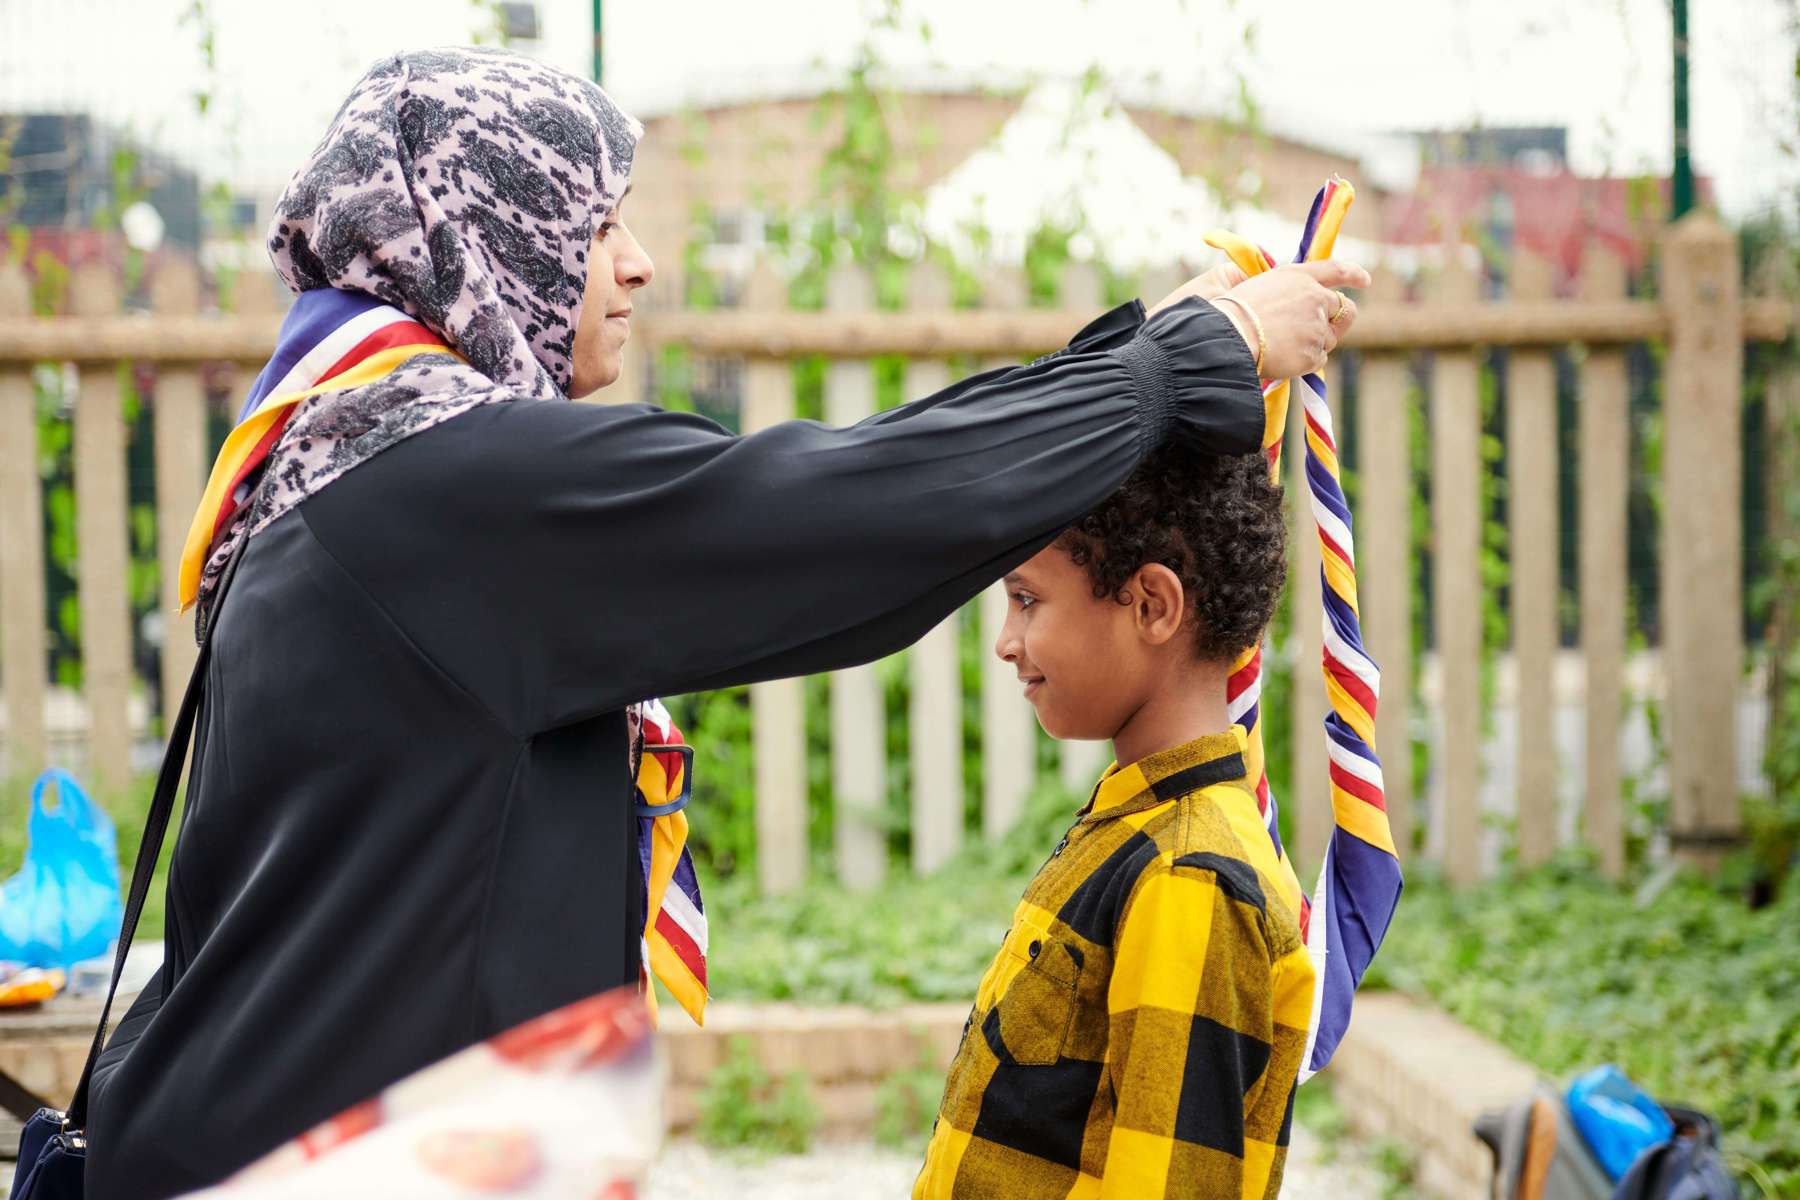 A volunteer places a white, red, yellow and blue scarf over the head of a young person.